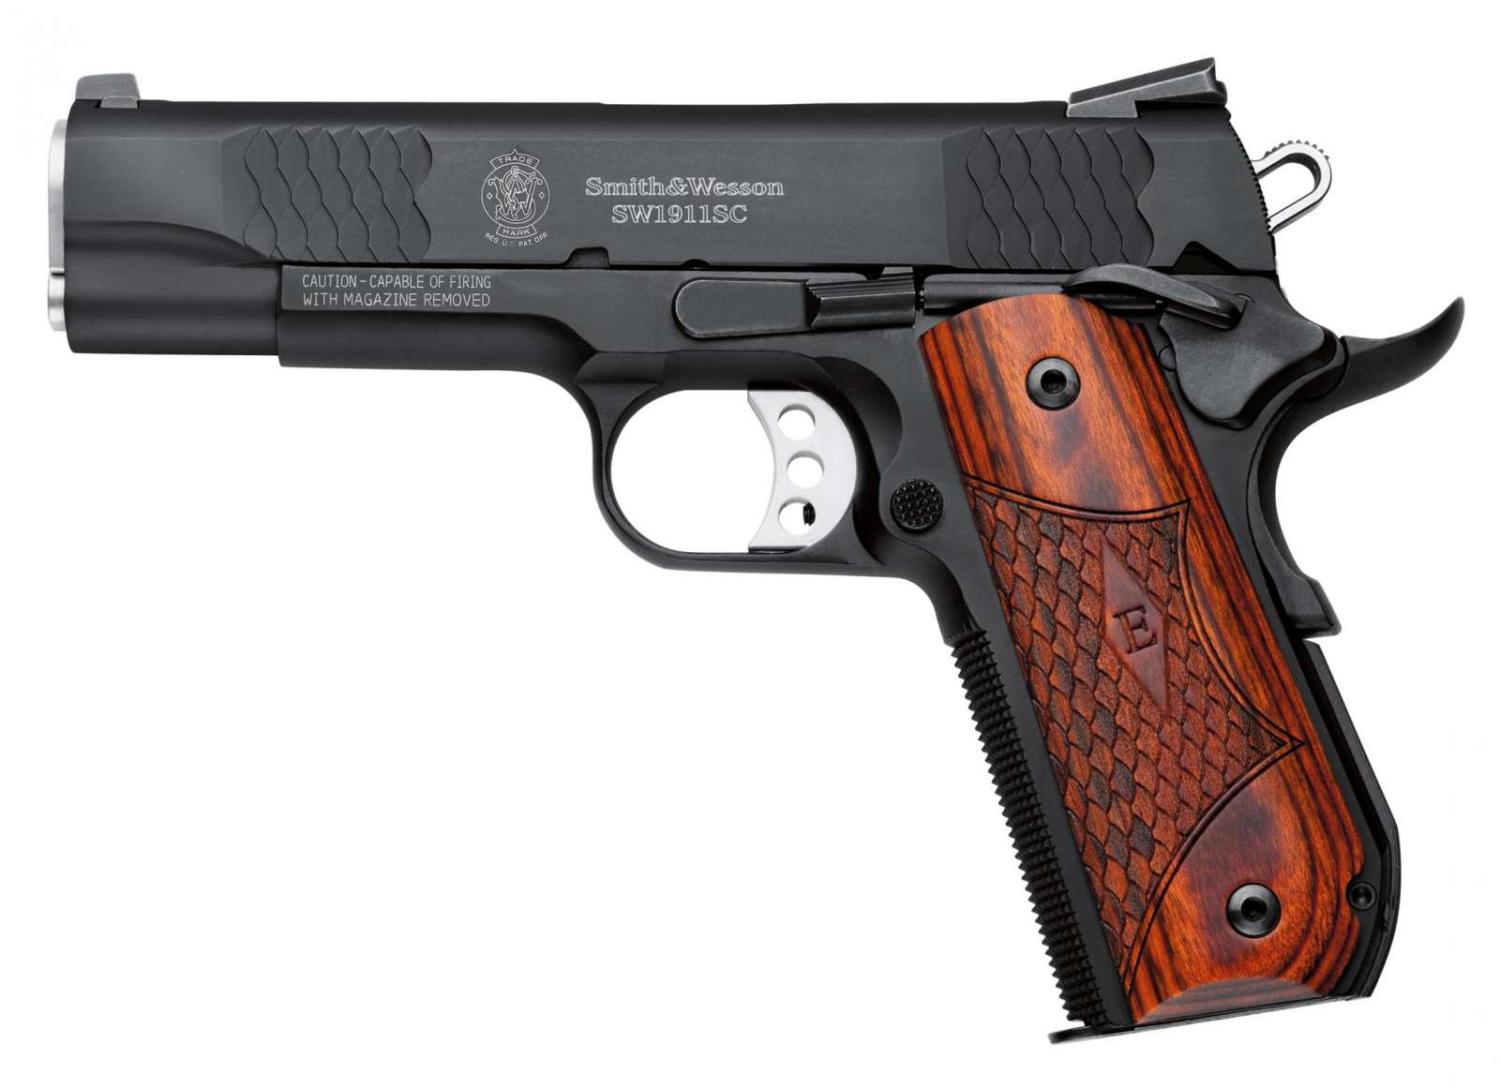 Smith & Wesson 108483 1911 E Series 45 ACP 4.25" 8+1 Black Laminate Wood/Rounded Butt Grip - $1363.99